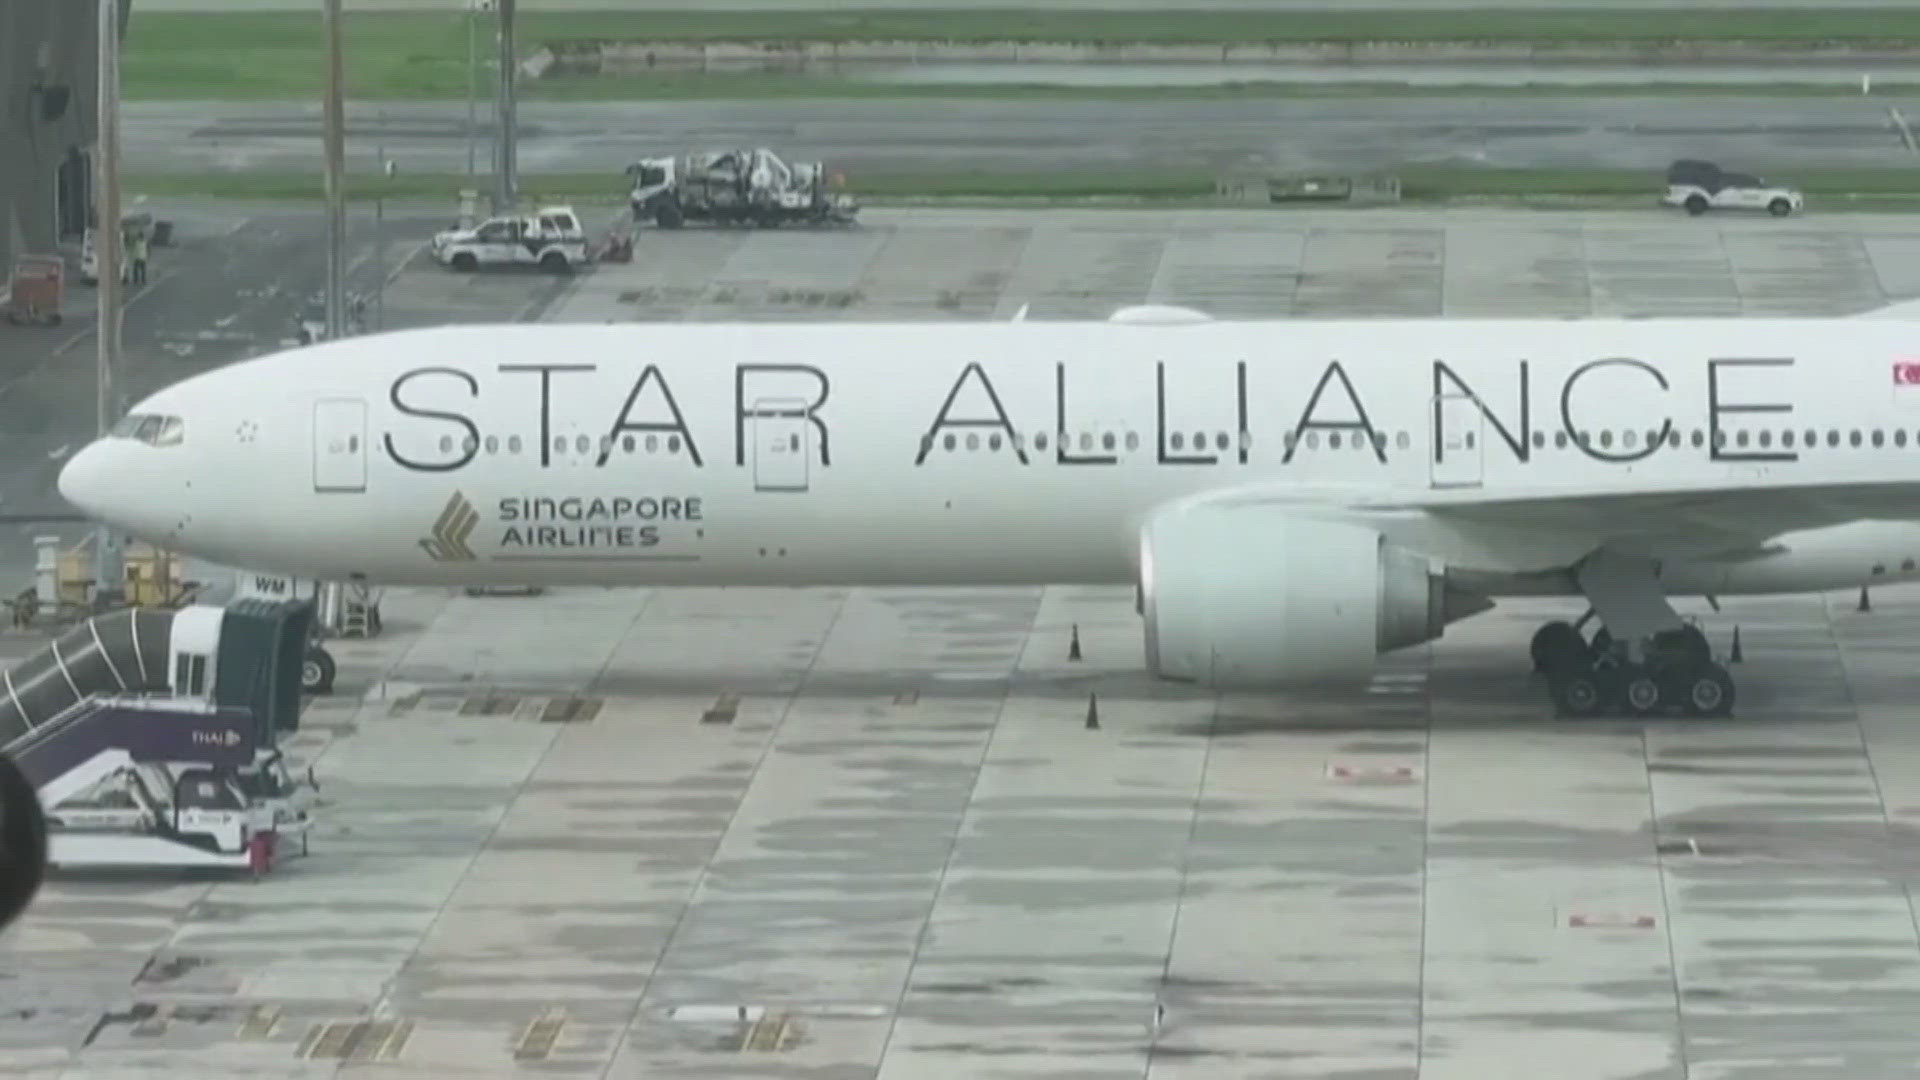 Video from the aftermath of the extreme turbulence event on a Singapore Airlines flight shows a man being carried off the plane on a stretcher.